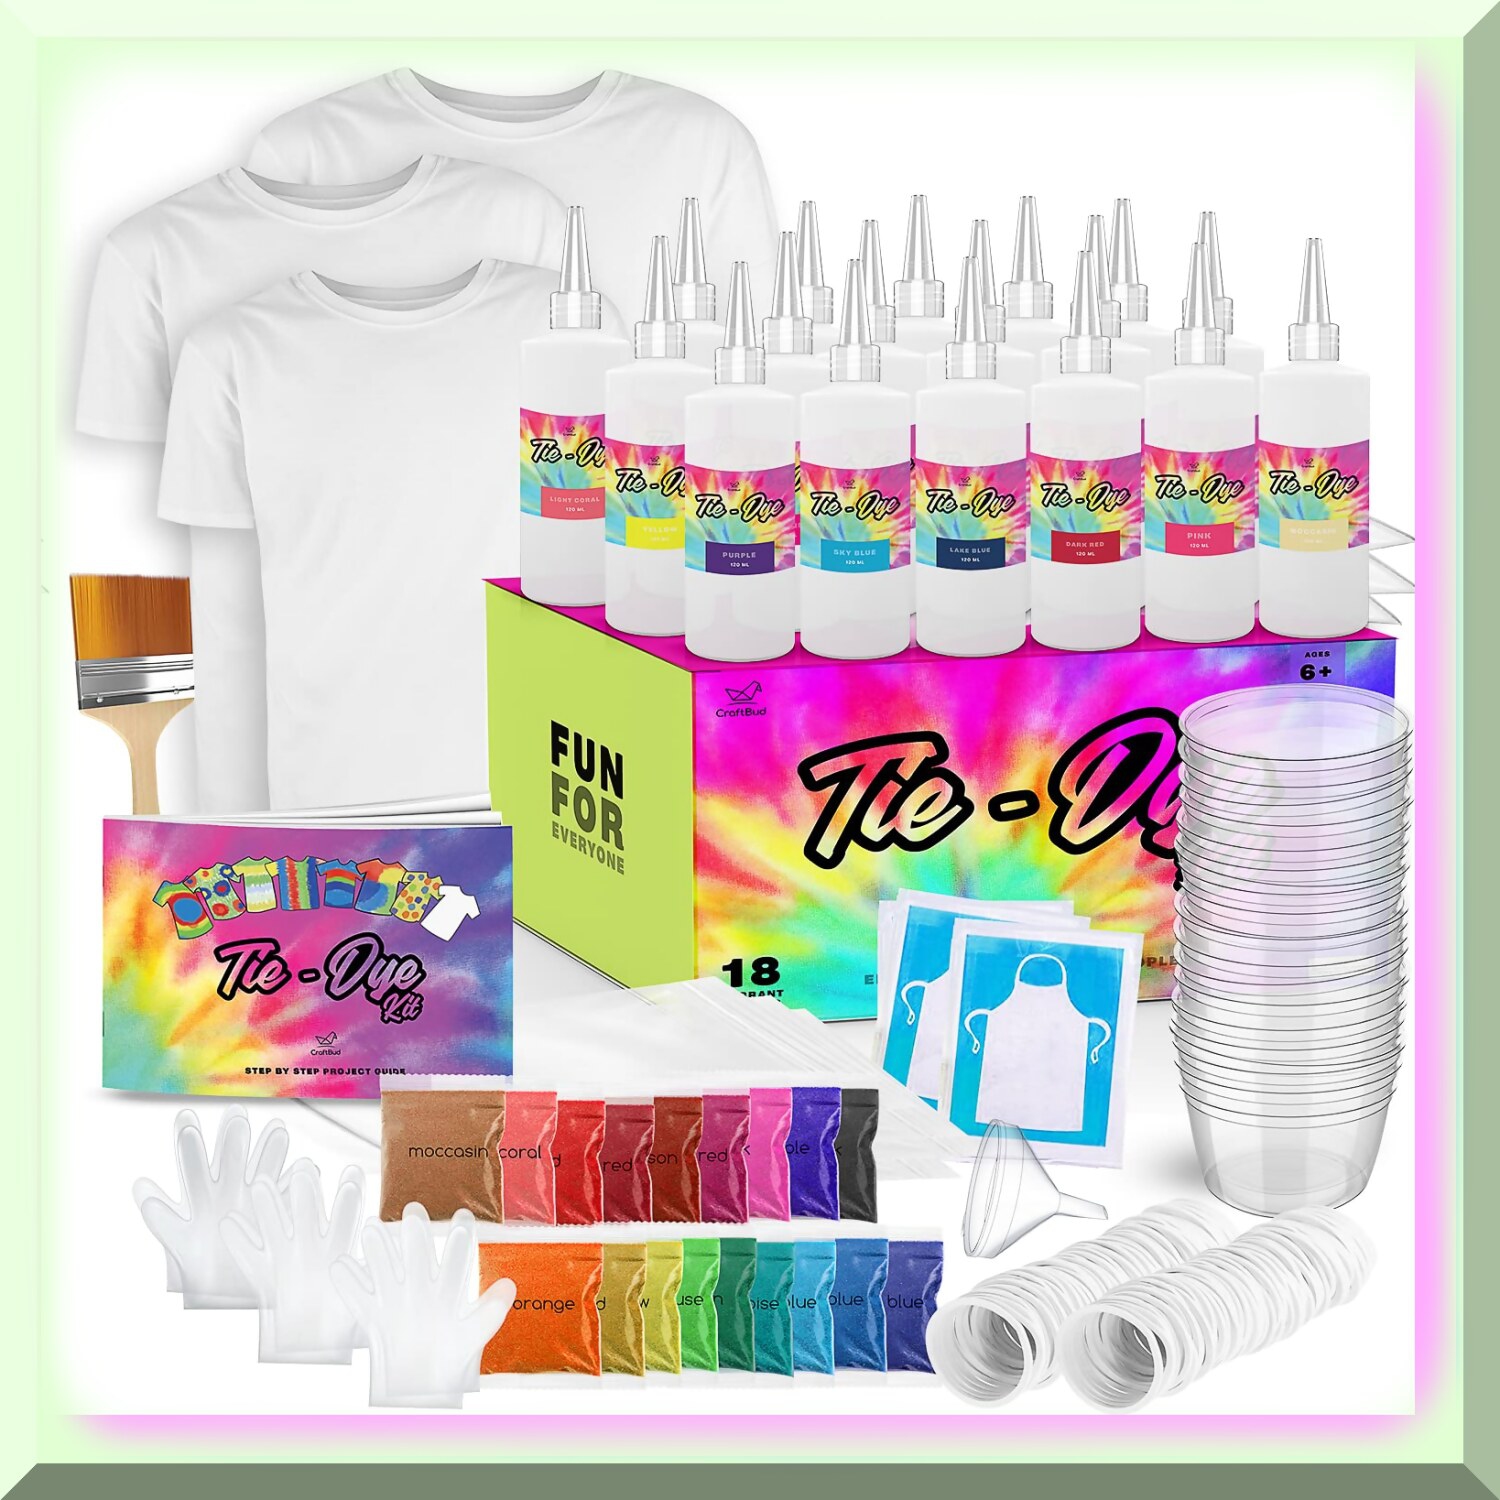 Rainbow Splash Tie Dye Mega Kit - 200 Pieces for Kids & Adults! Includes 3 Uni Adult T-shirts (S, M, L), 18 Vibrant Colors, Guide Book & More. Perfect for Large Groups & Outdoor Fu